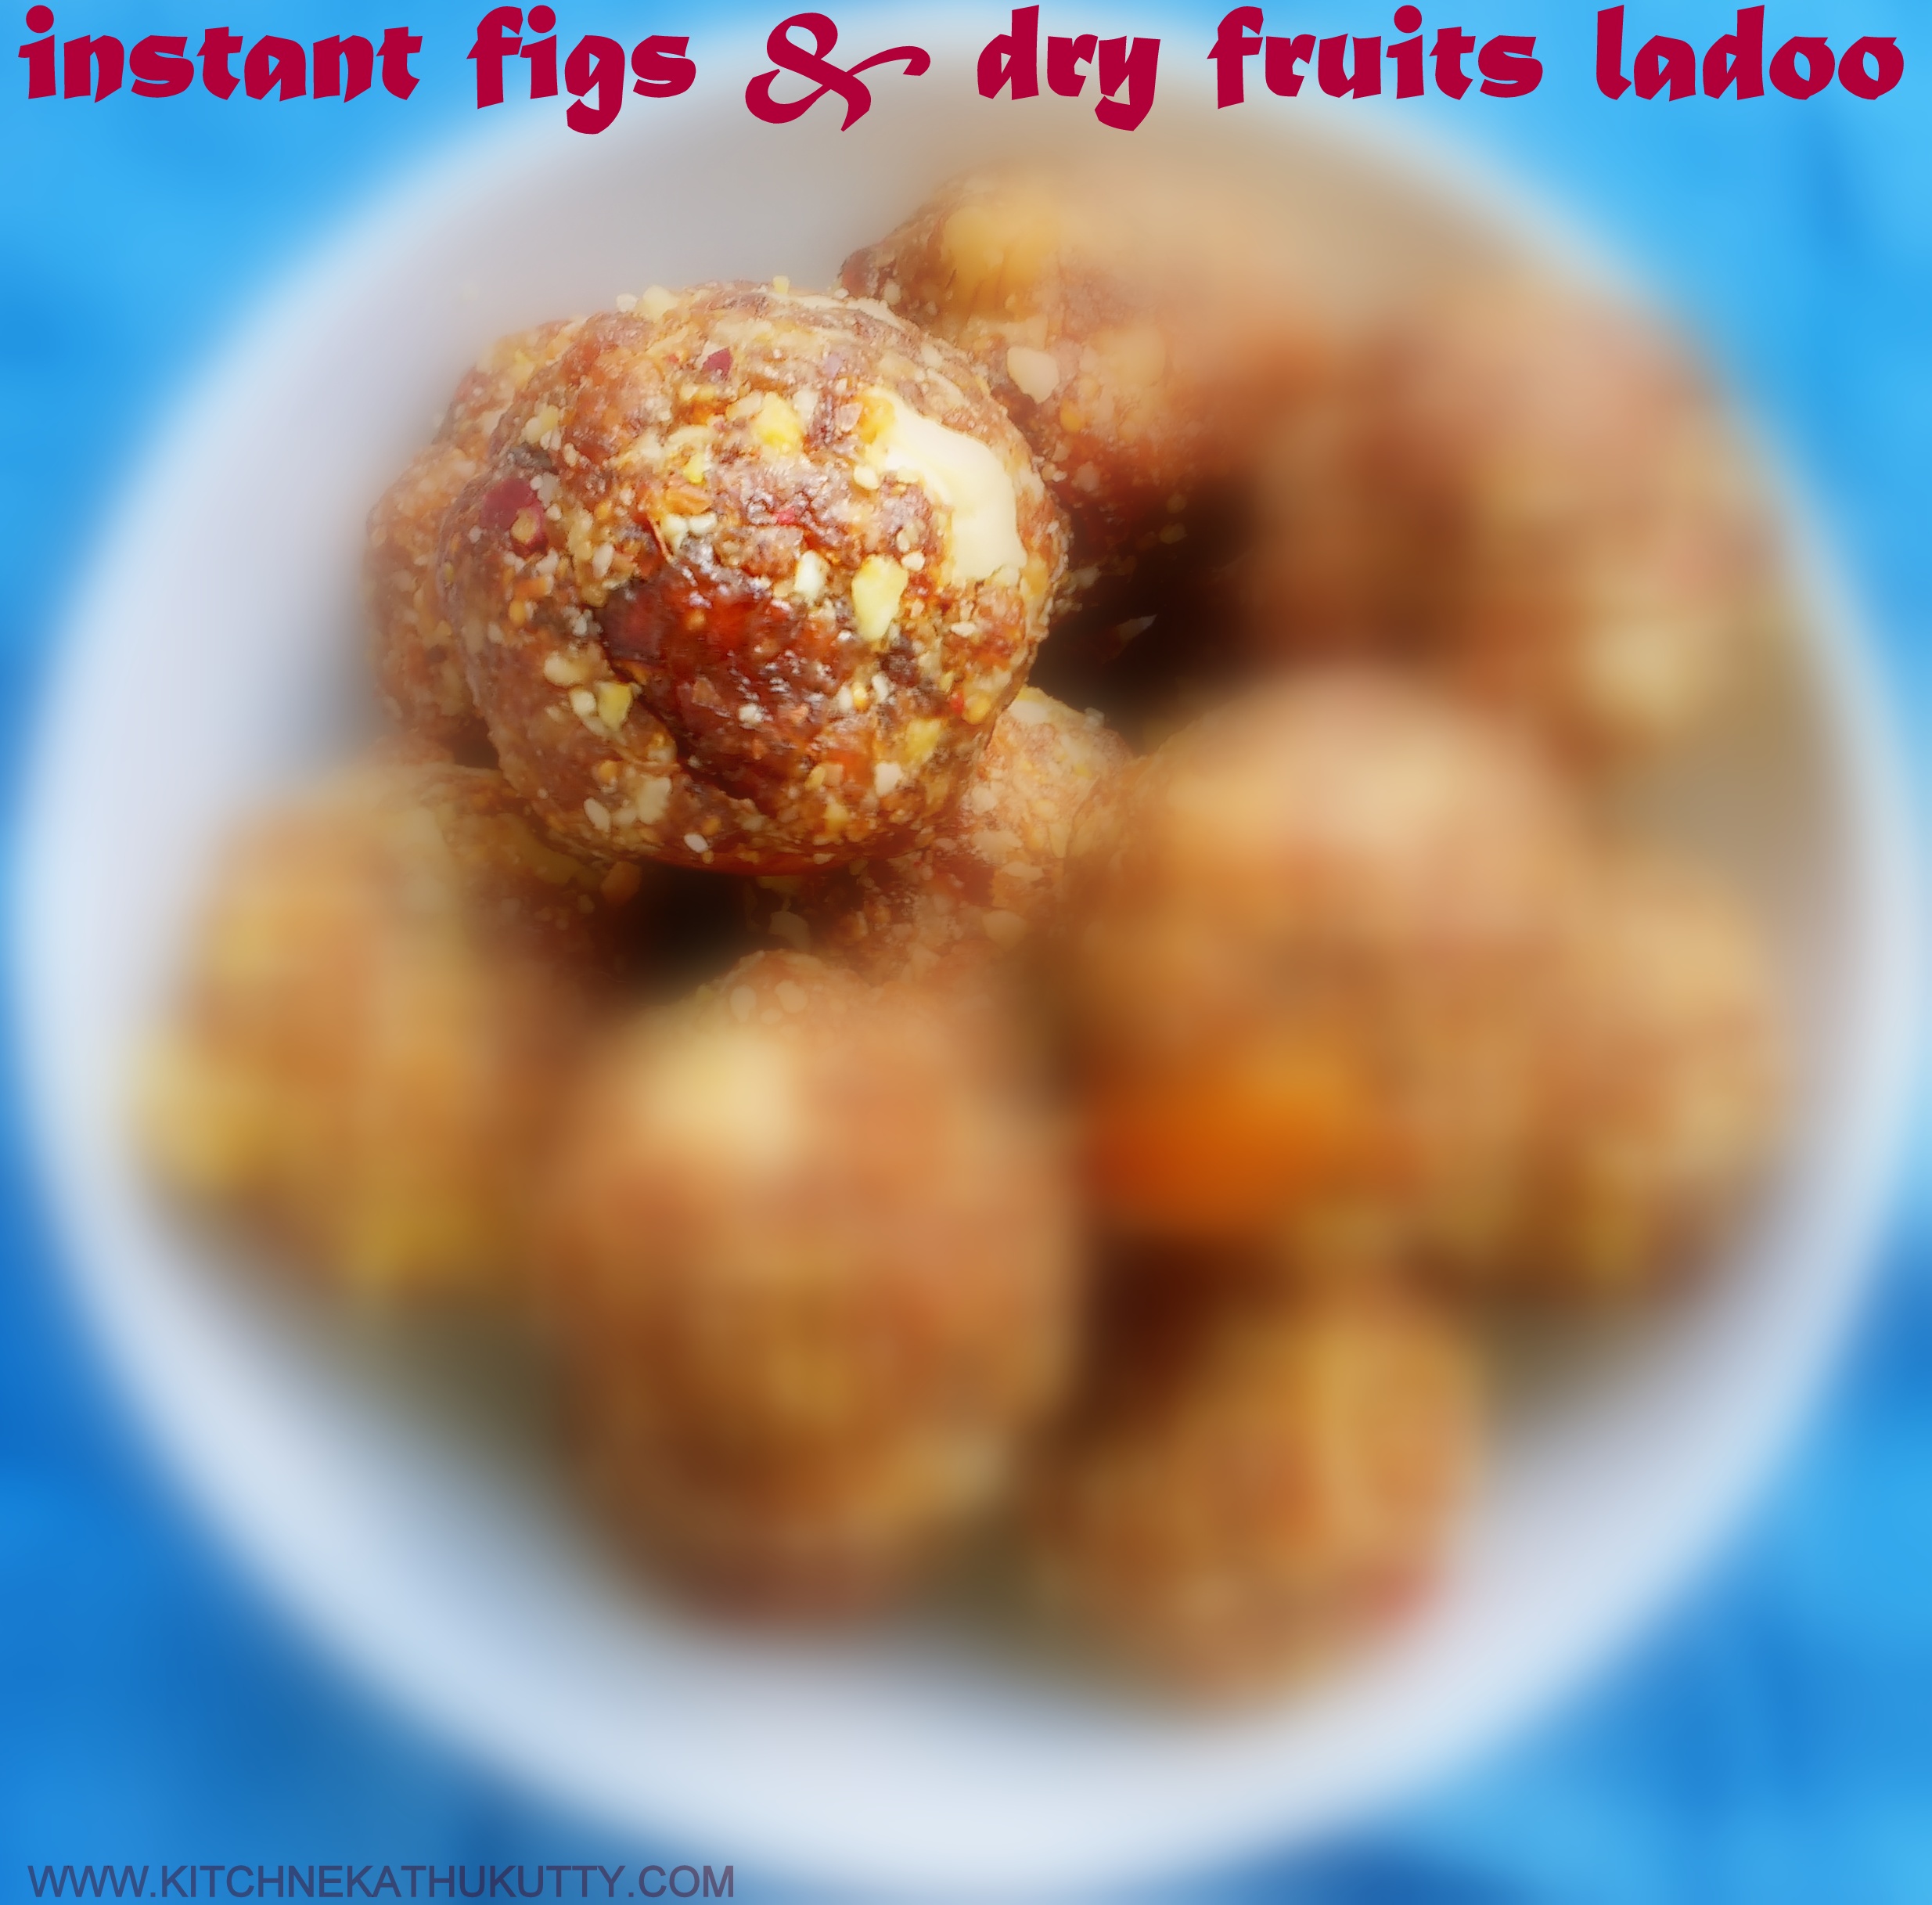 instant figs and dry fruits ladoo